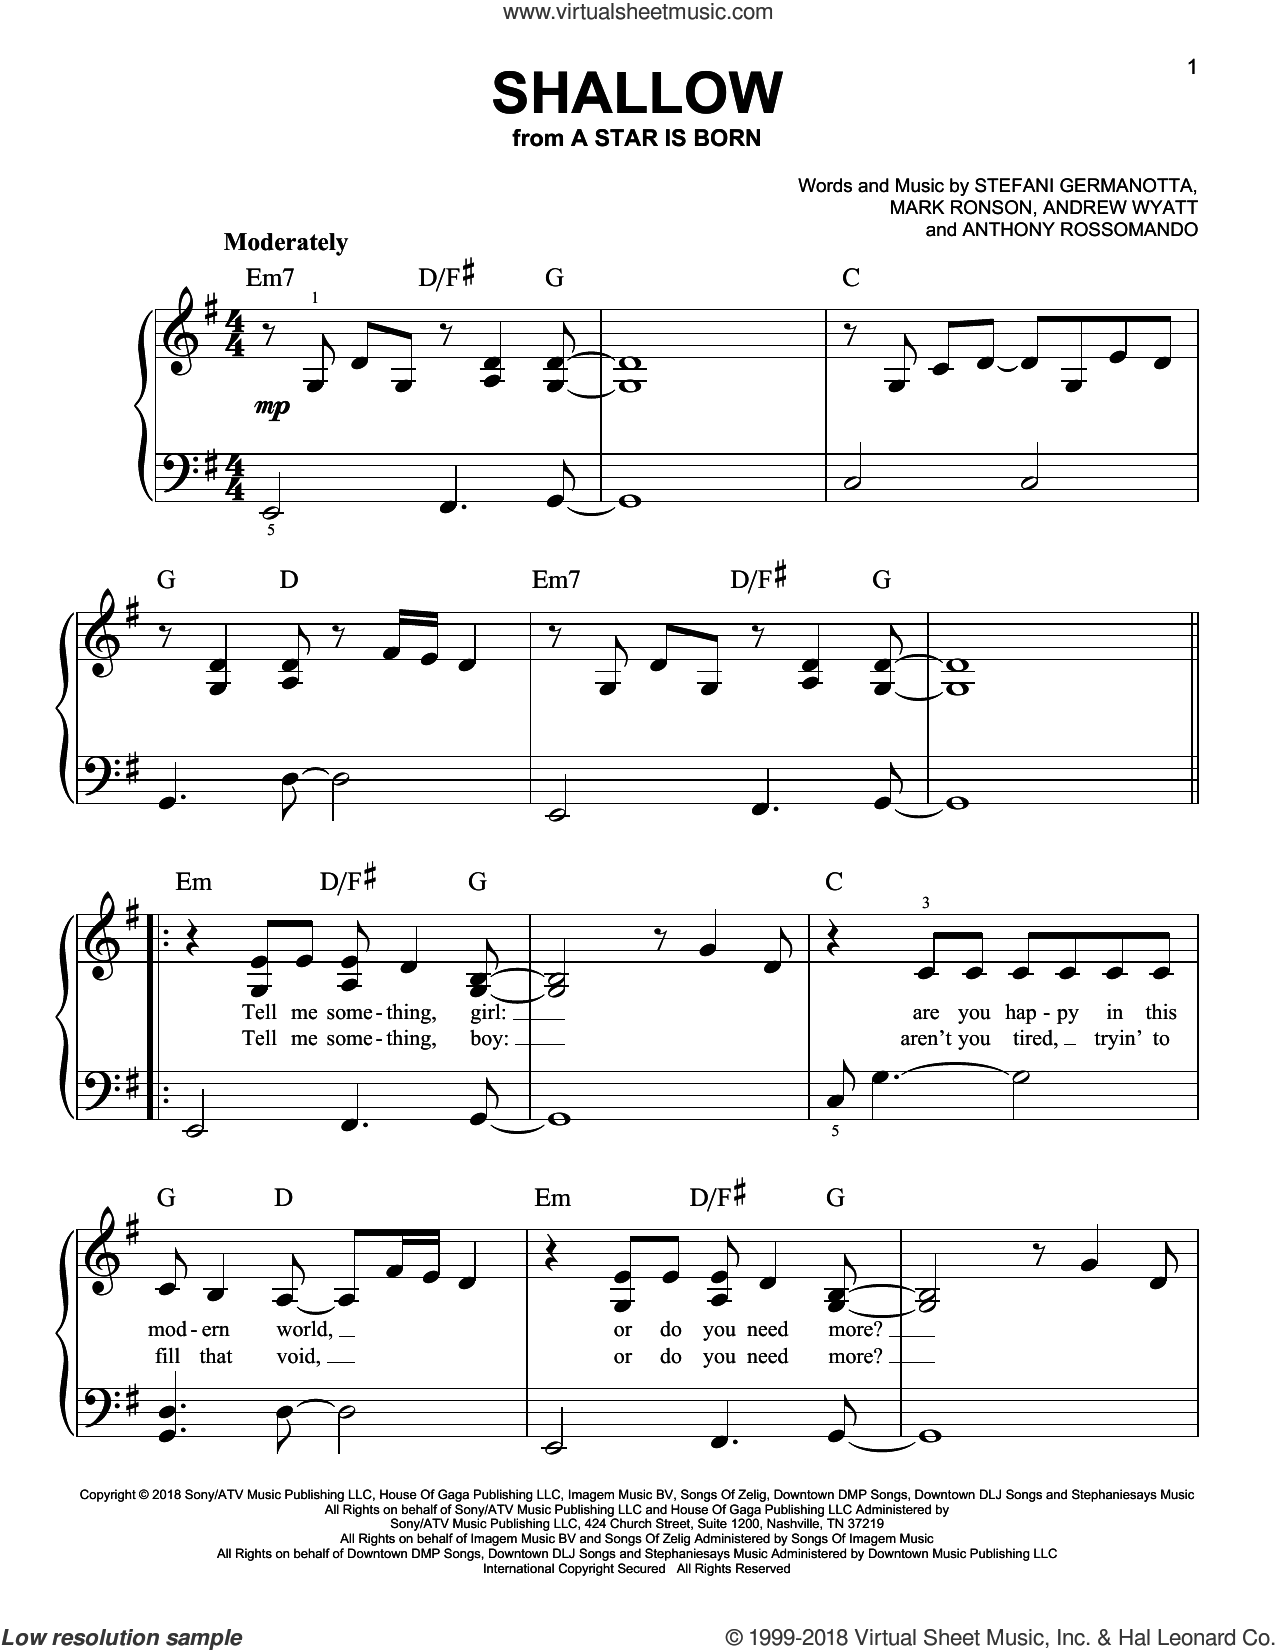 Shallow (from A Star Born) sheet music for piano solo (PDF)